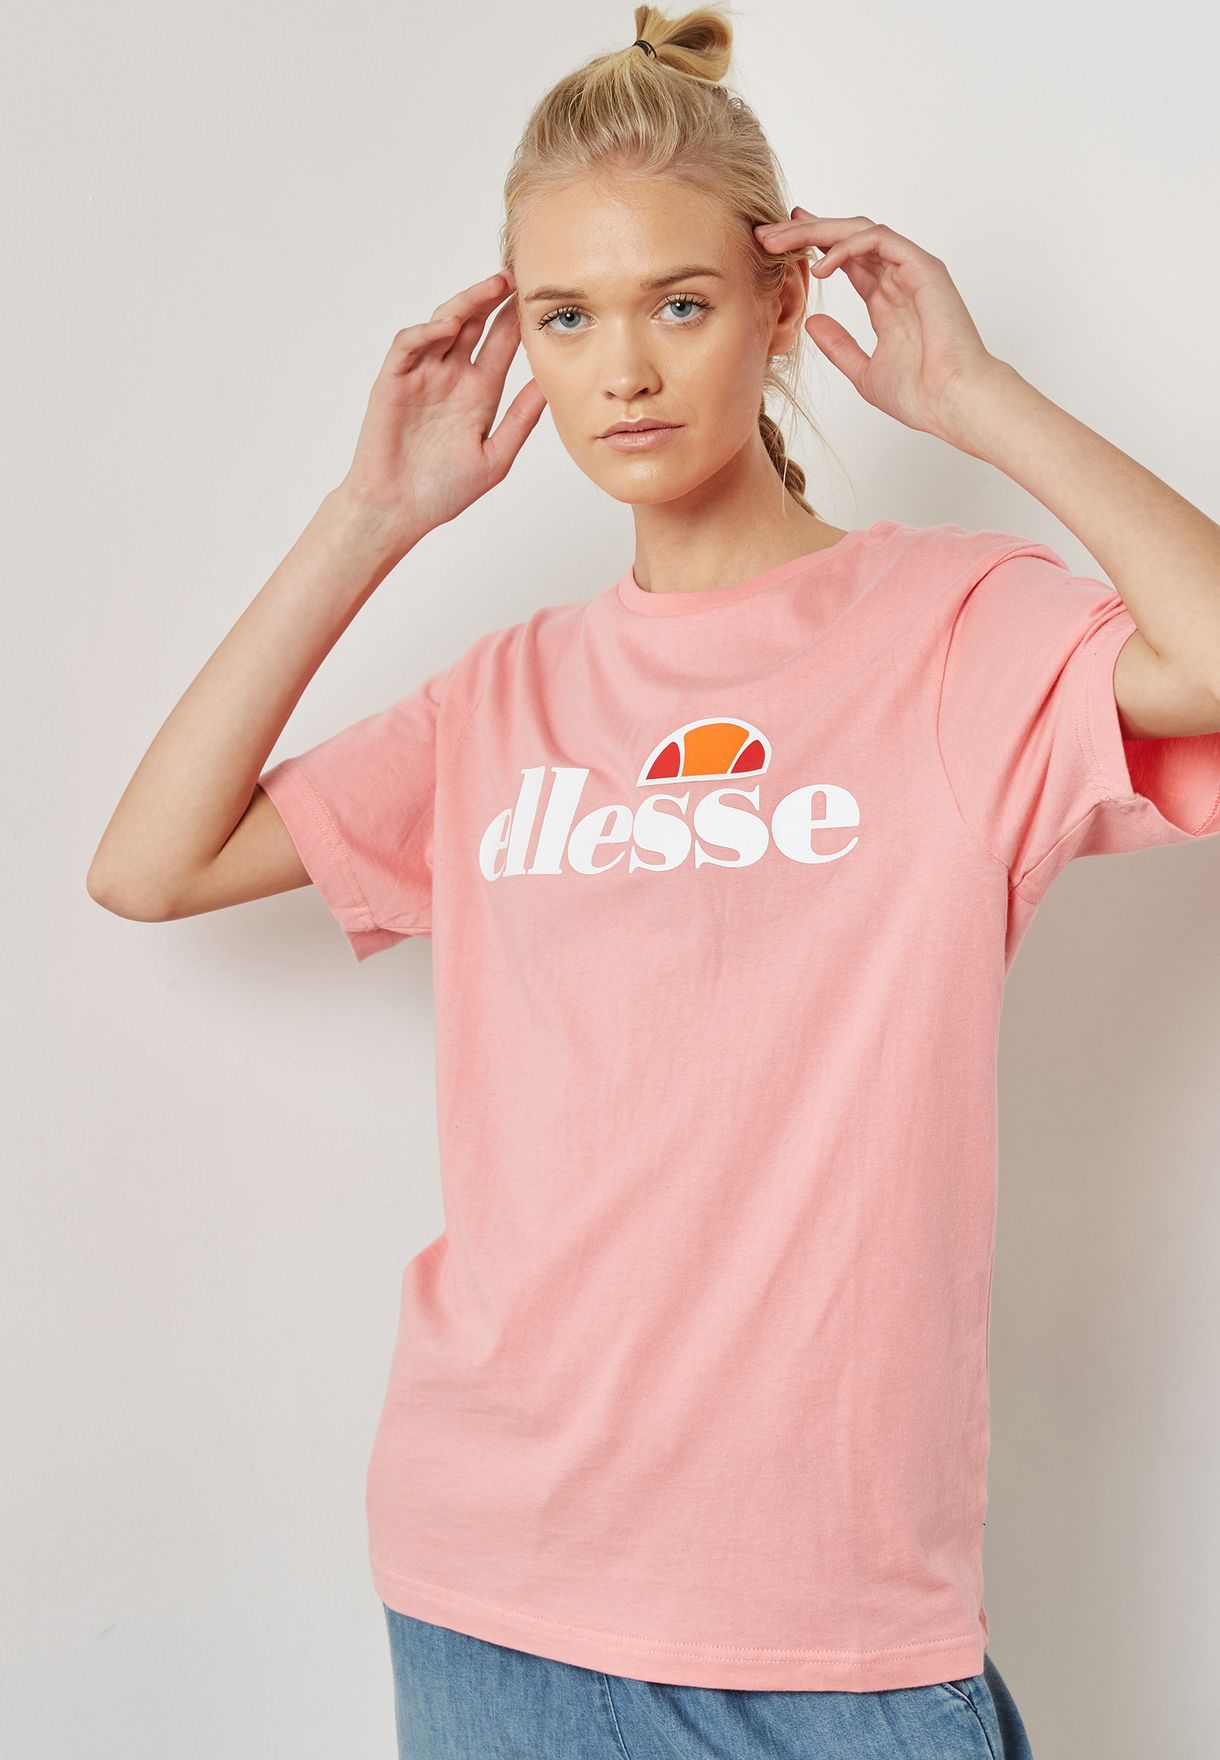 Buy Ellesse pink Albany T-Shirt for 